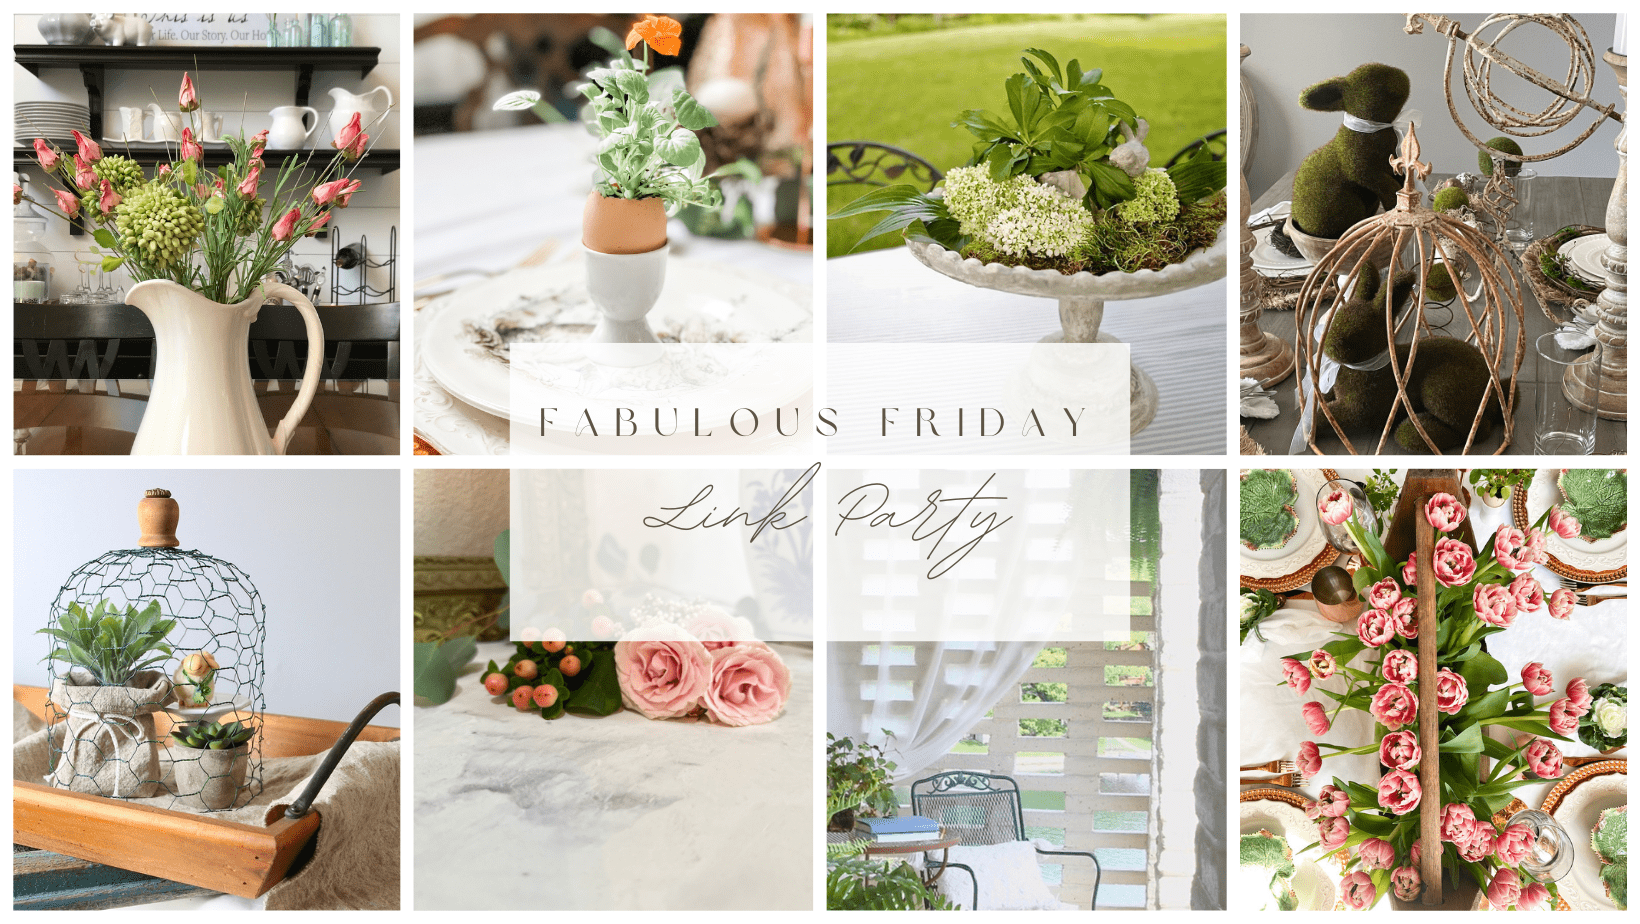 Fabulous Friday Link Party 3.10.23